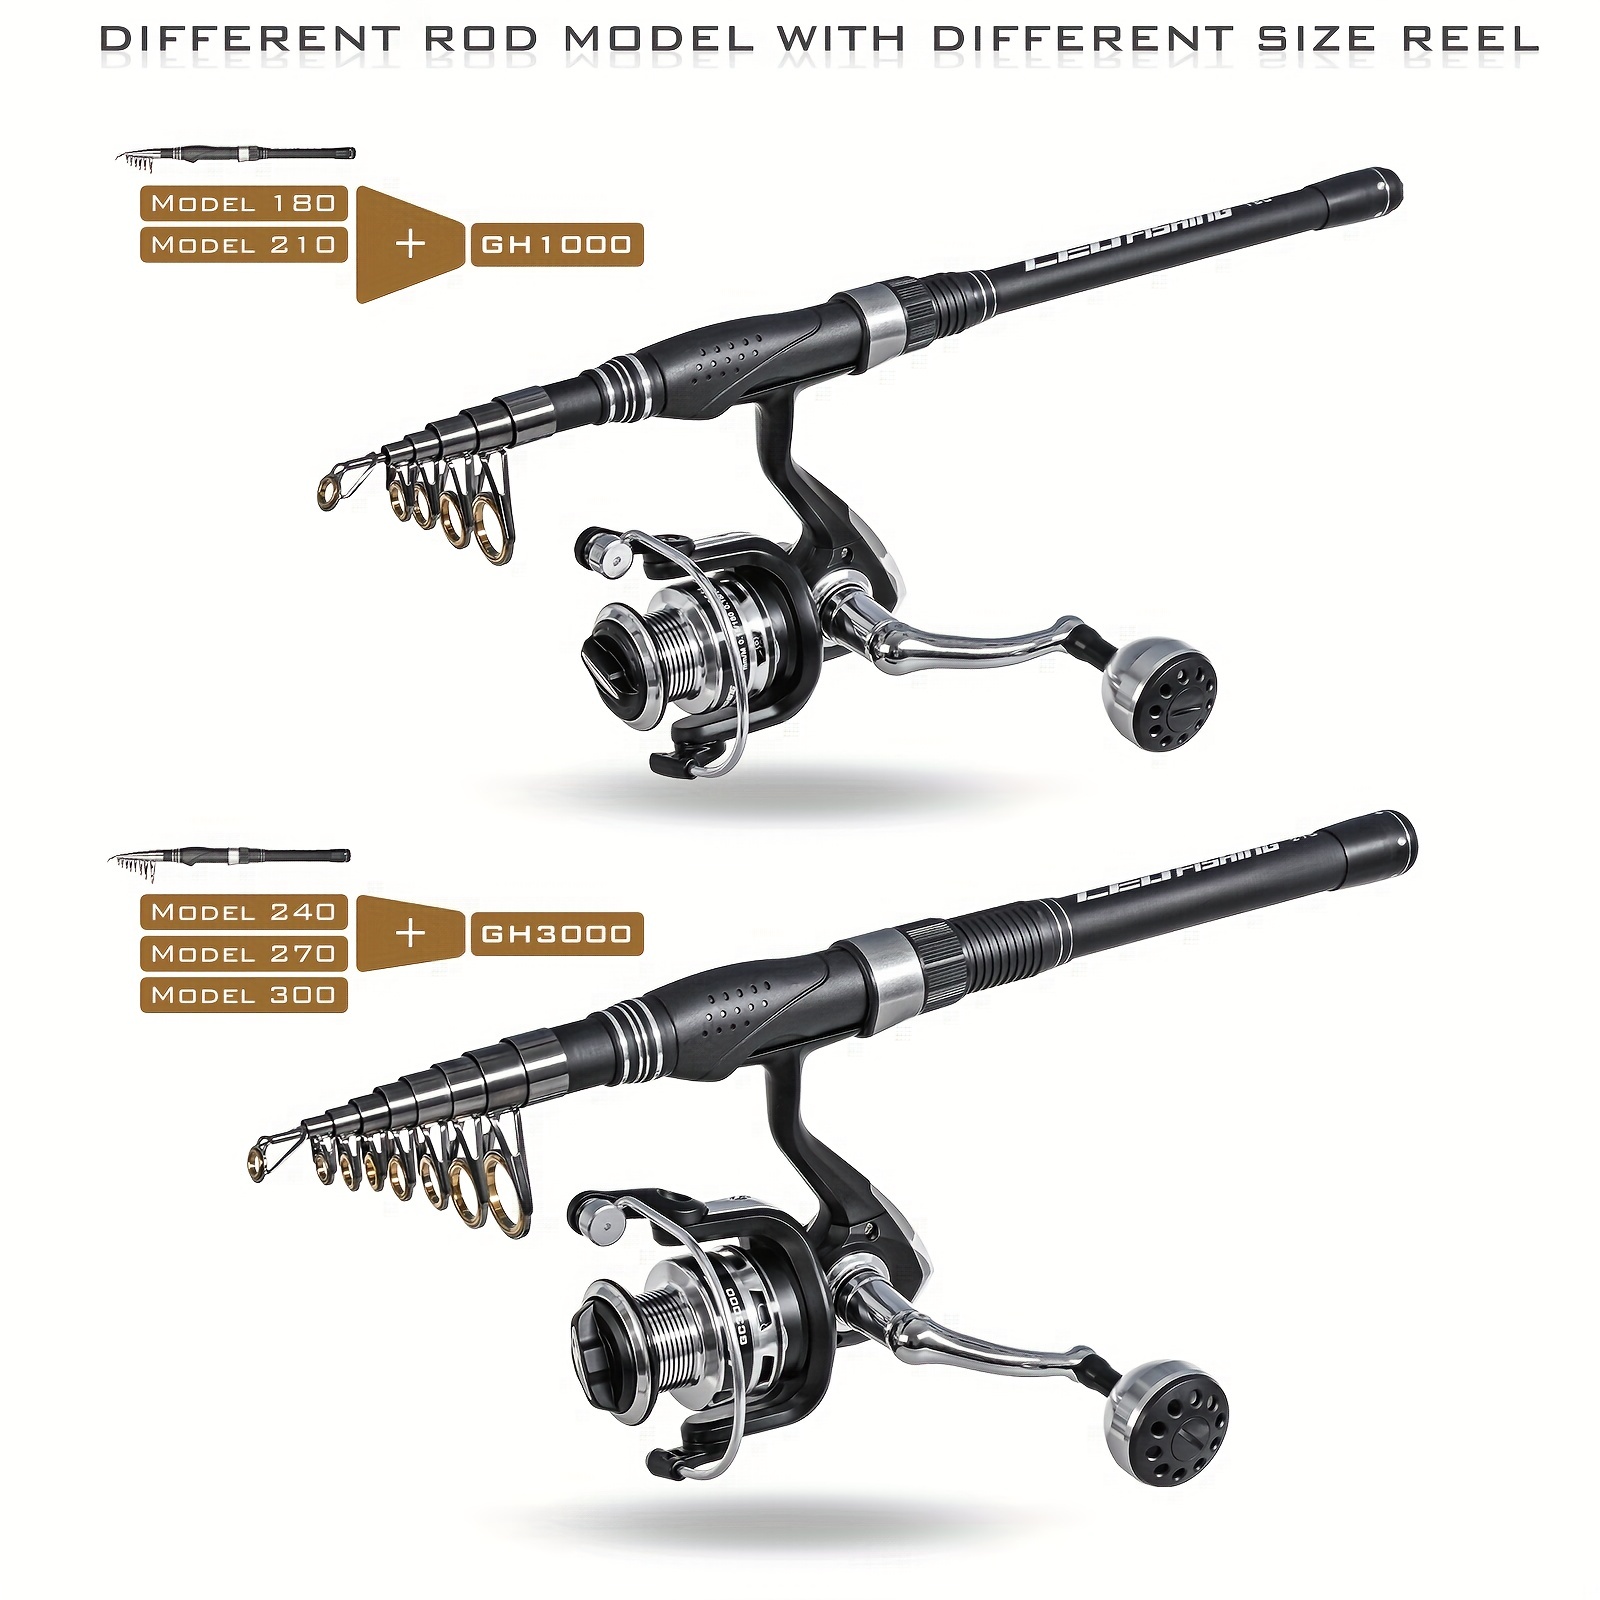 Telescopic Fishing Pole Spinning Reel Combo with Fishing Carrier